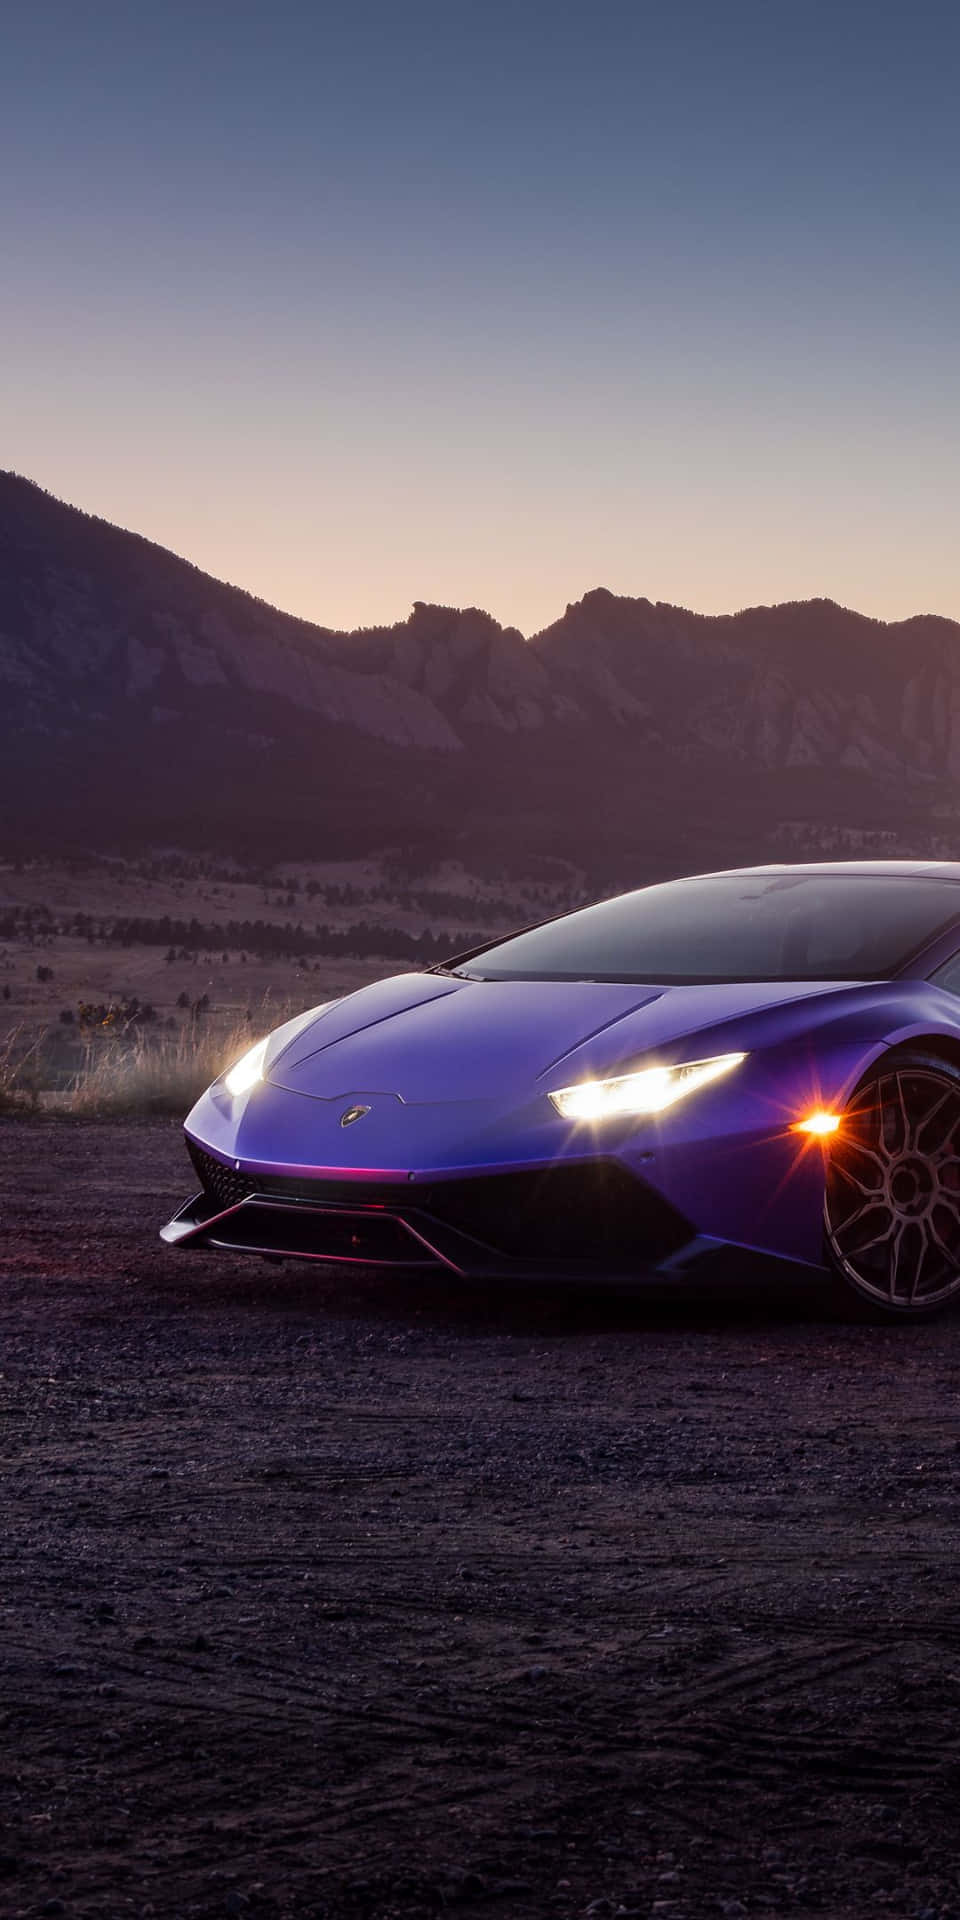 The Lamborghini Huracan Is Parked In The Desert